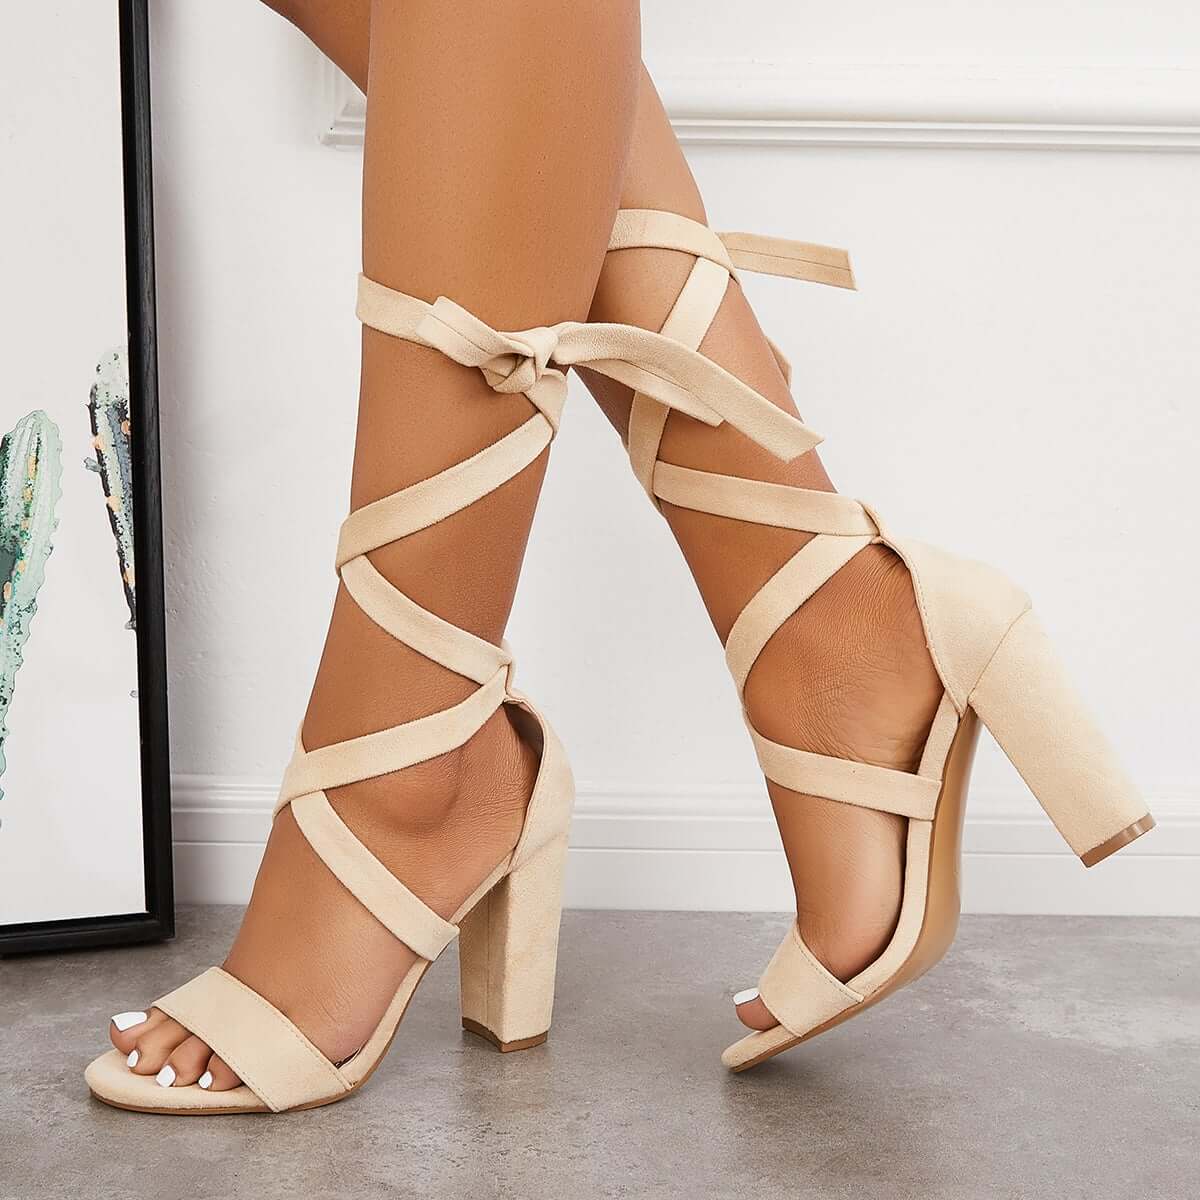 Chunky Block High Heels Lace Up Ankle Strap Sandals Pairmore